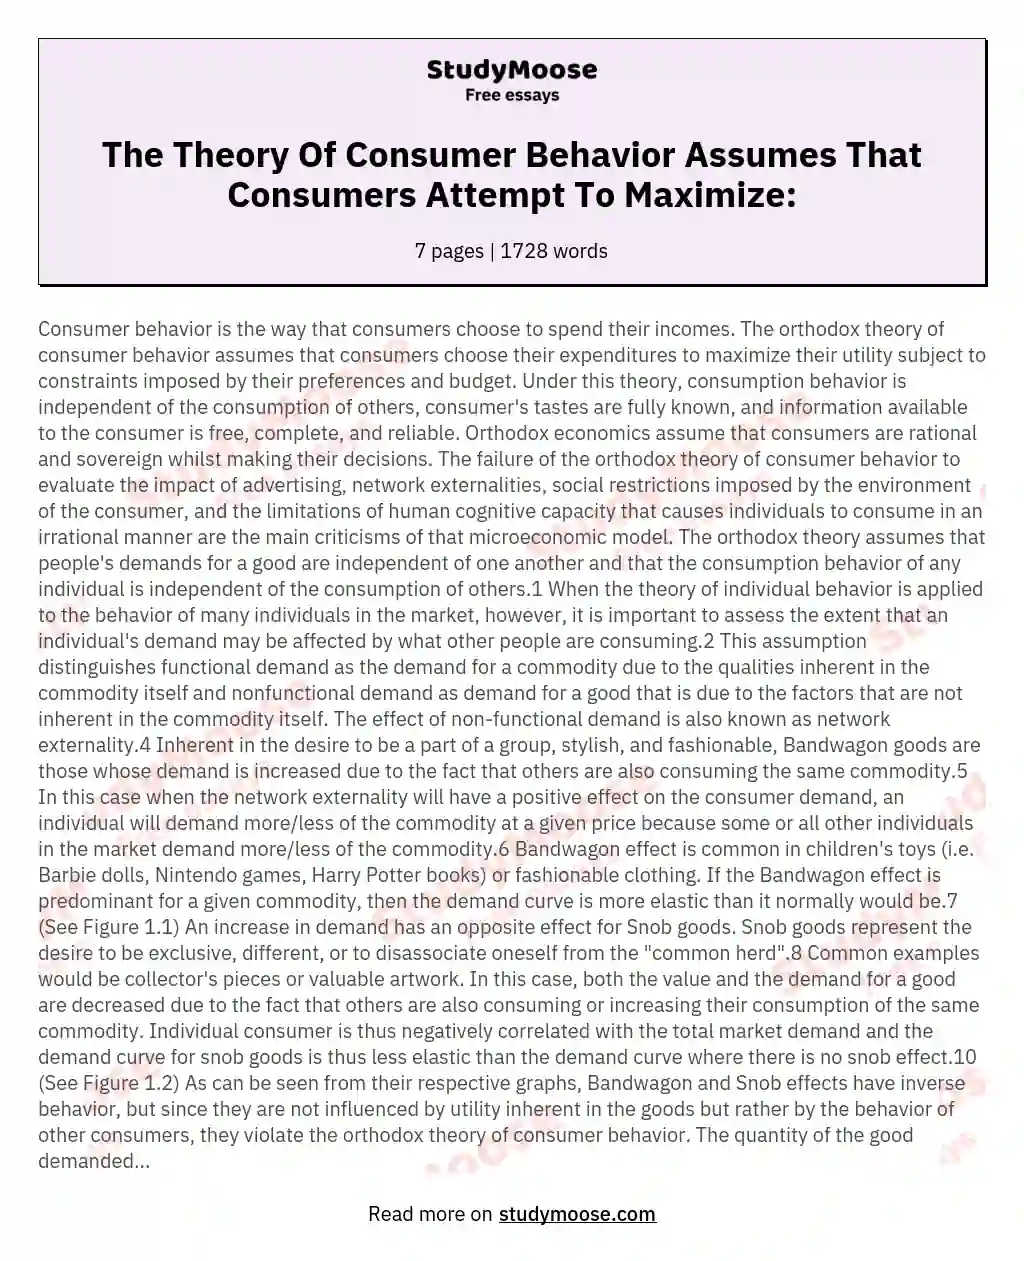 The Theory Of Consumer Behavior Assumes That Consumers Attempt To Maximize: essay